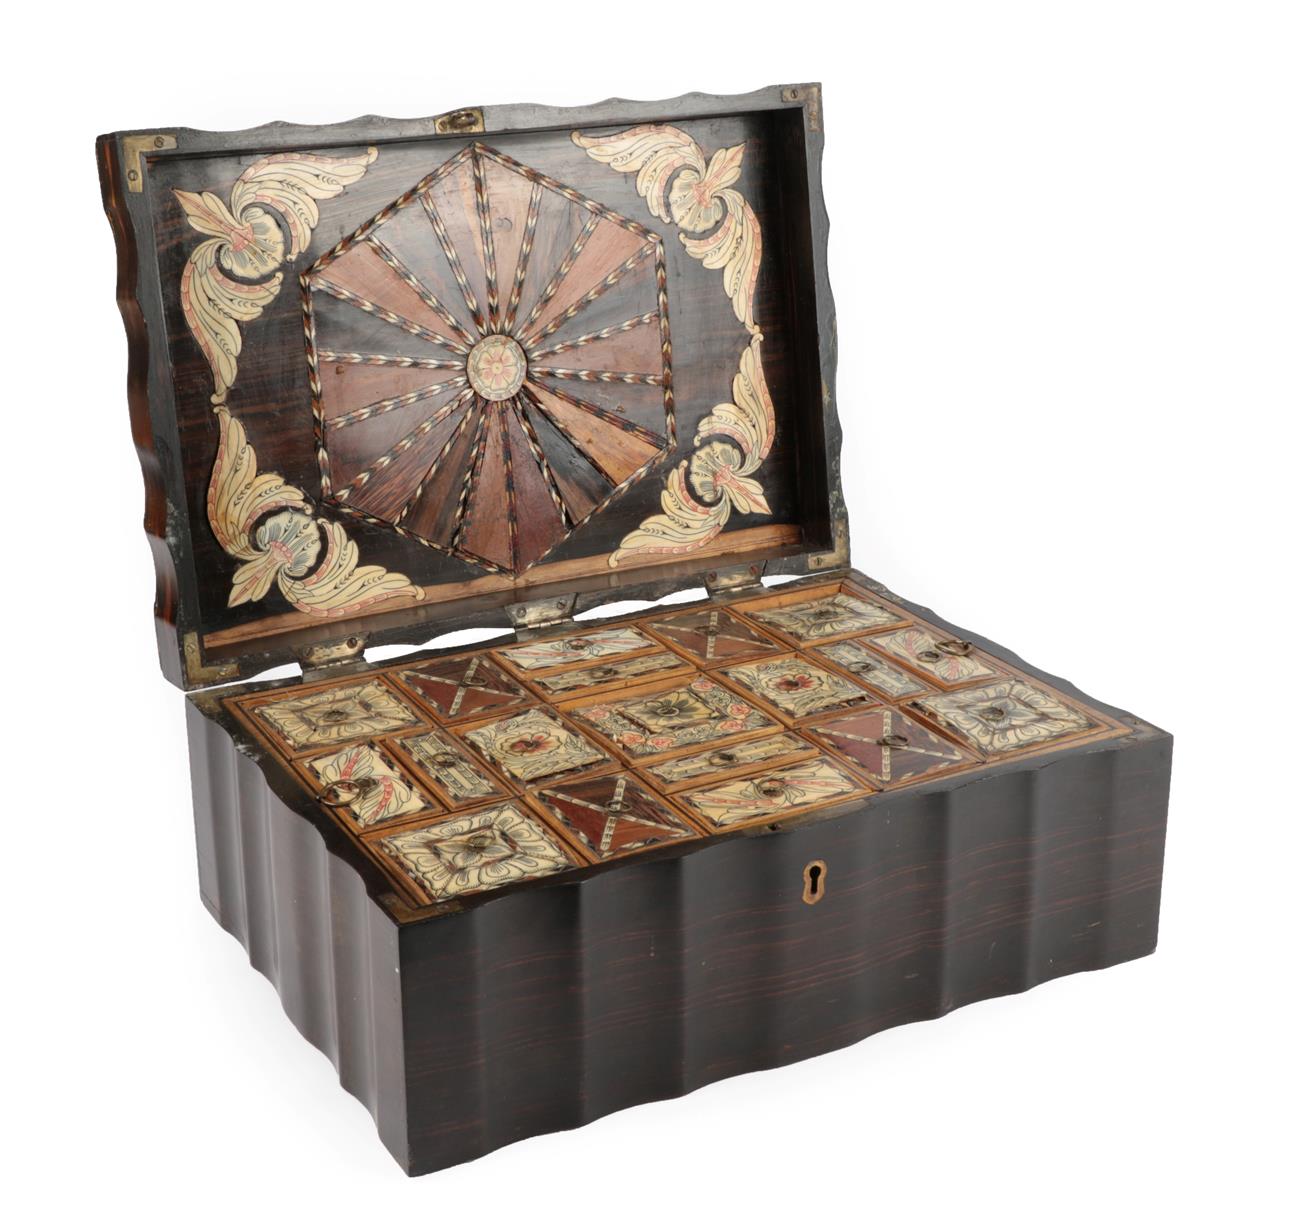 Lot 94 - A Ceylonese Coromandel, Ivory and Parquetry Work Box, 19th century, of shaped rectangular form, the